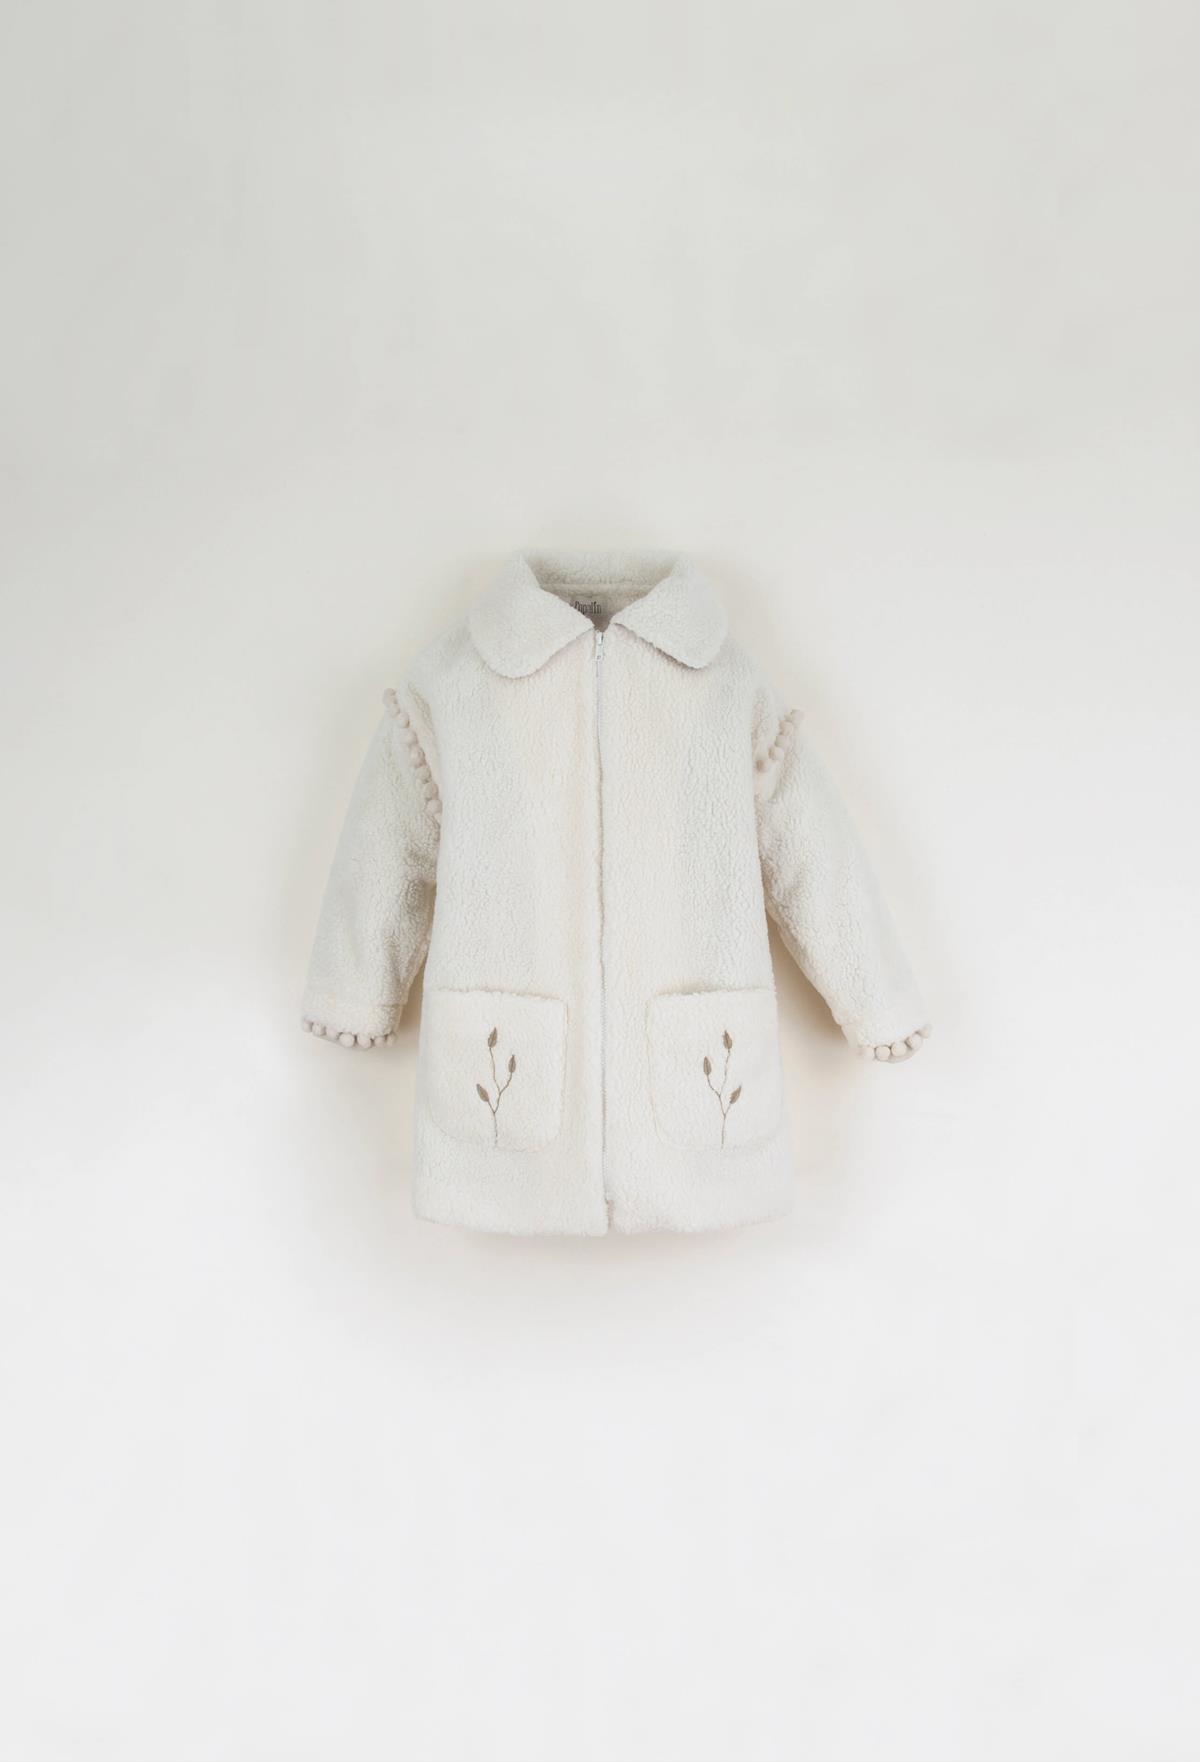 Mod.40.3 Off-white embroidered coat with tassels | AW22.23 Mod.40.3 Off-white embroidered coat with tassels